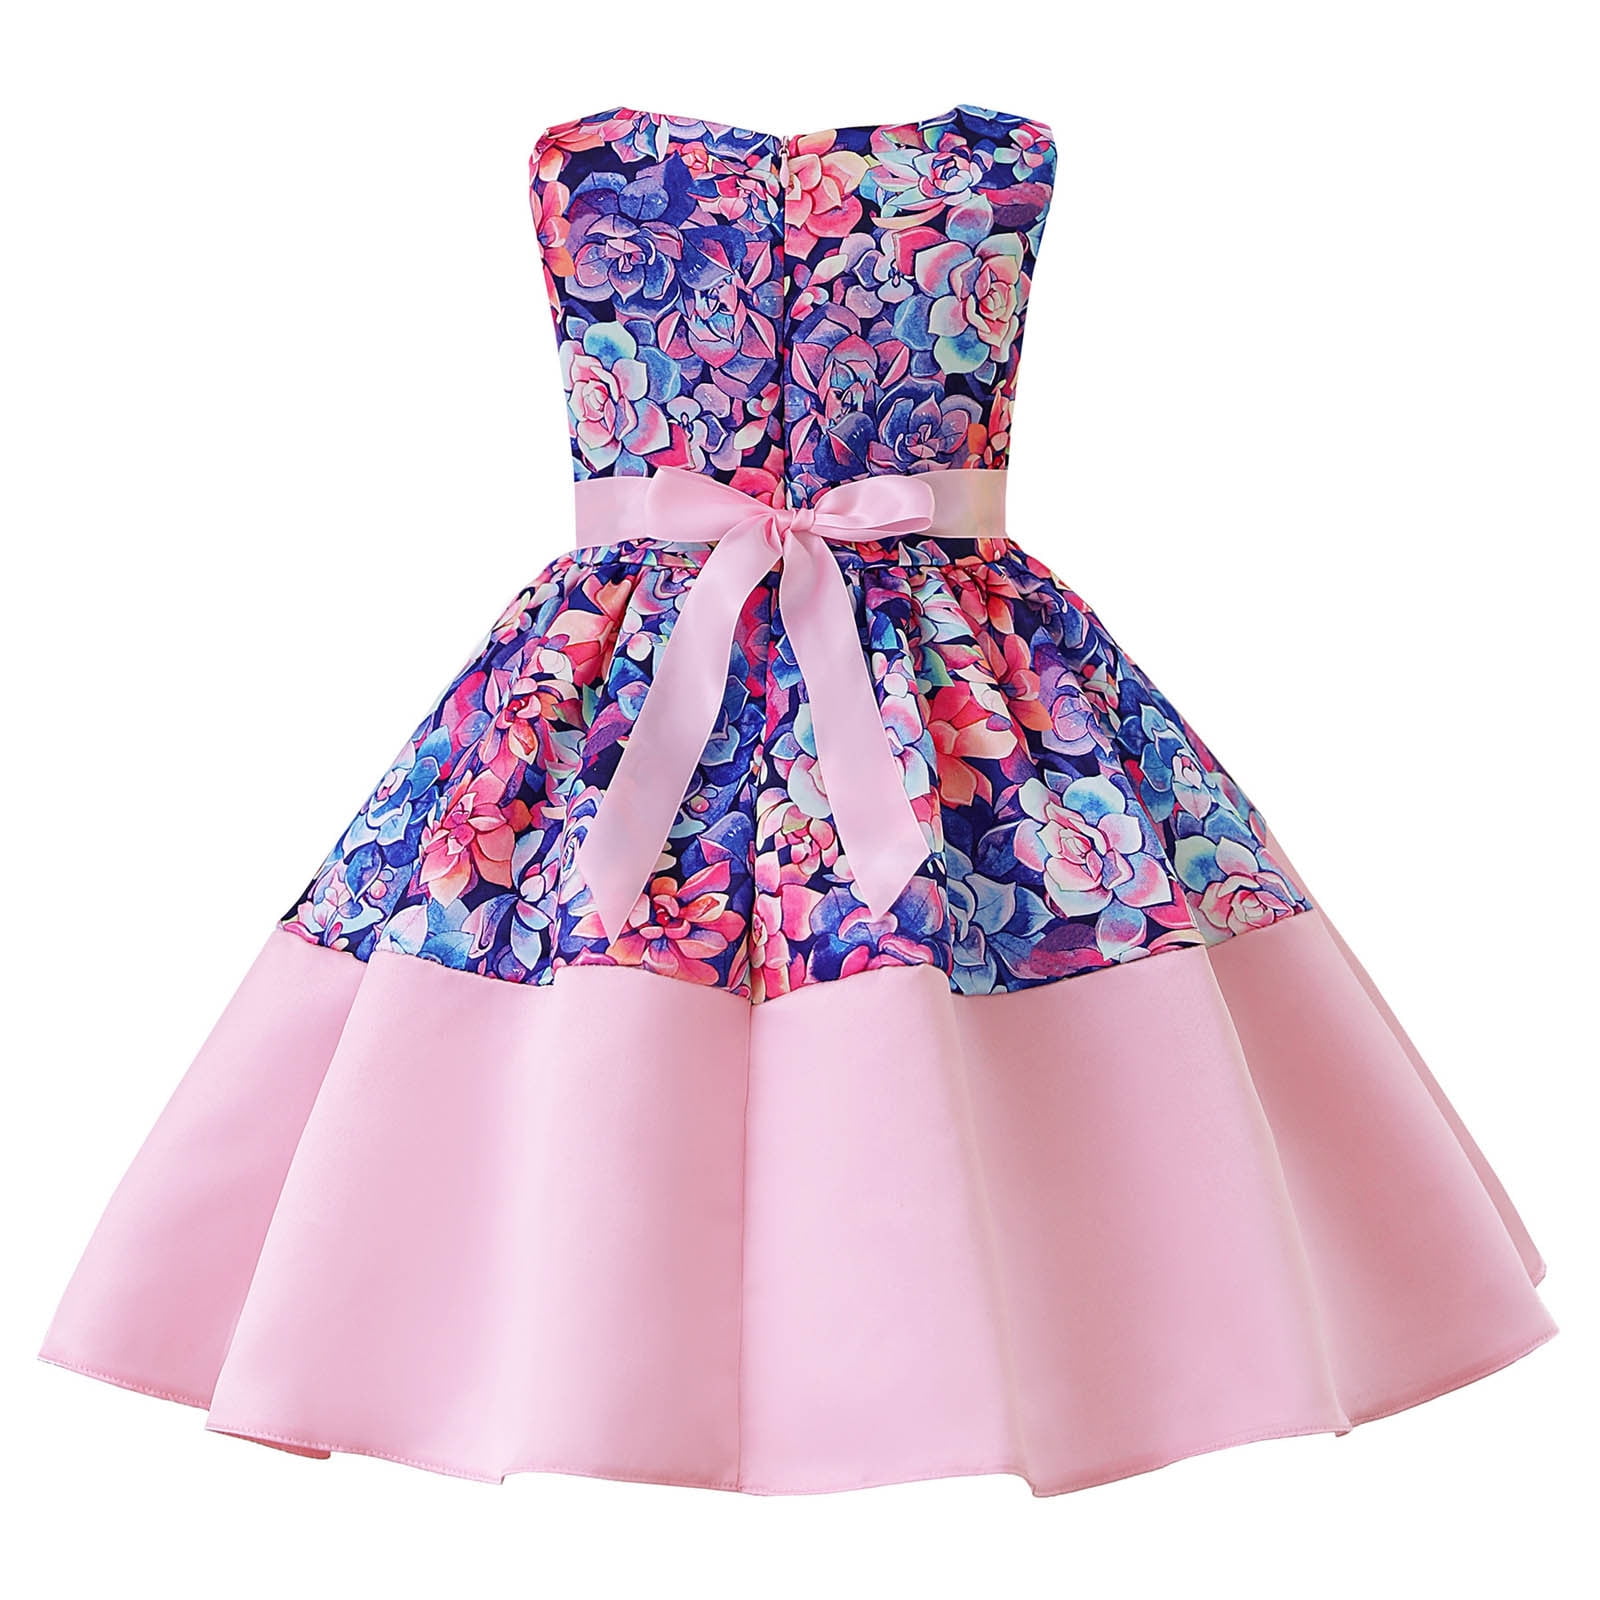 dresses for 9 year olds